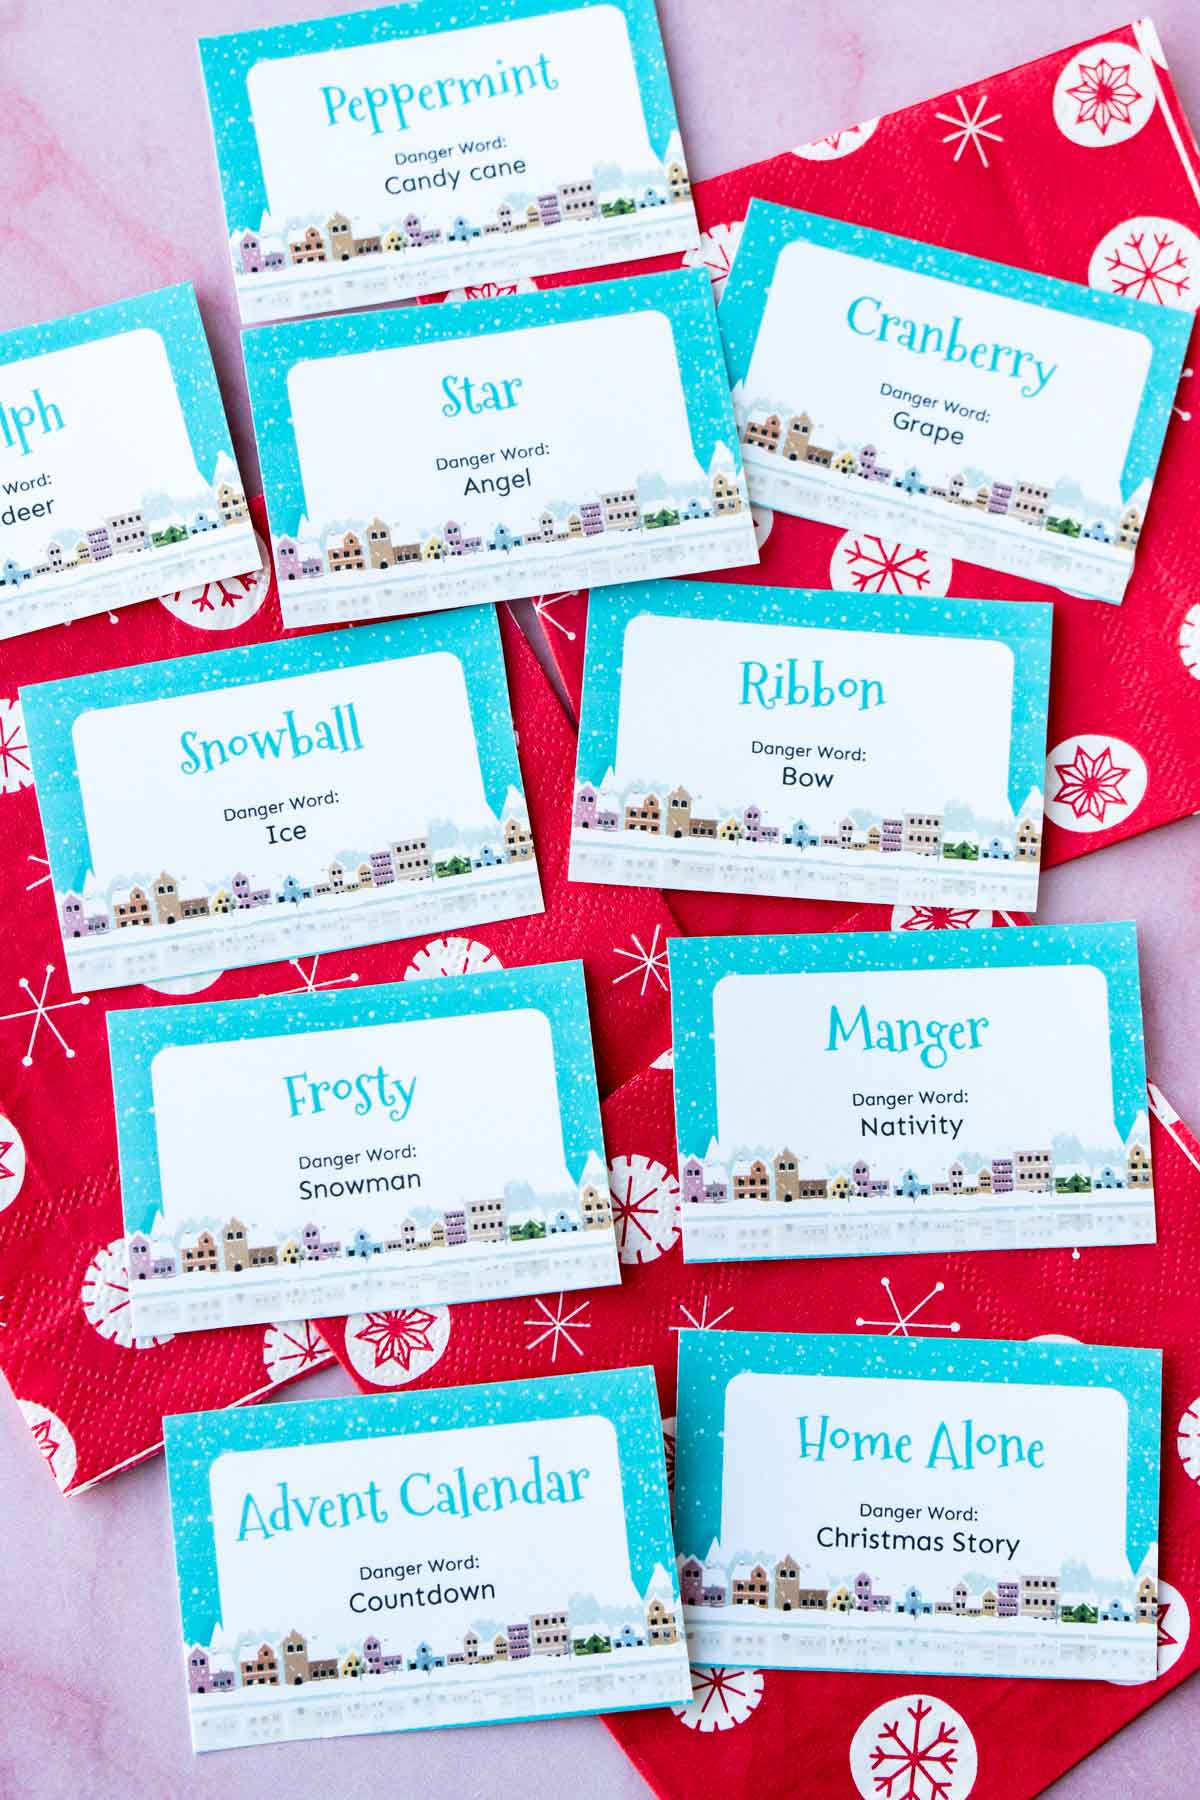 Free Printable Christmas Danger Words Game Play Party Plan